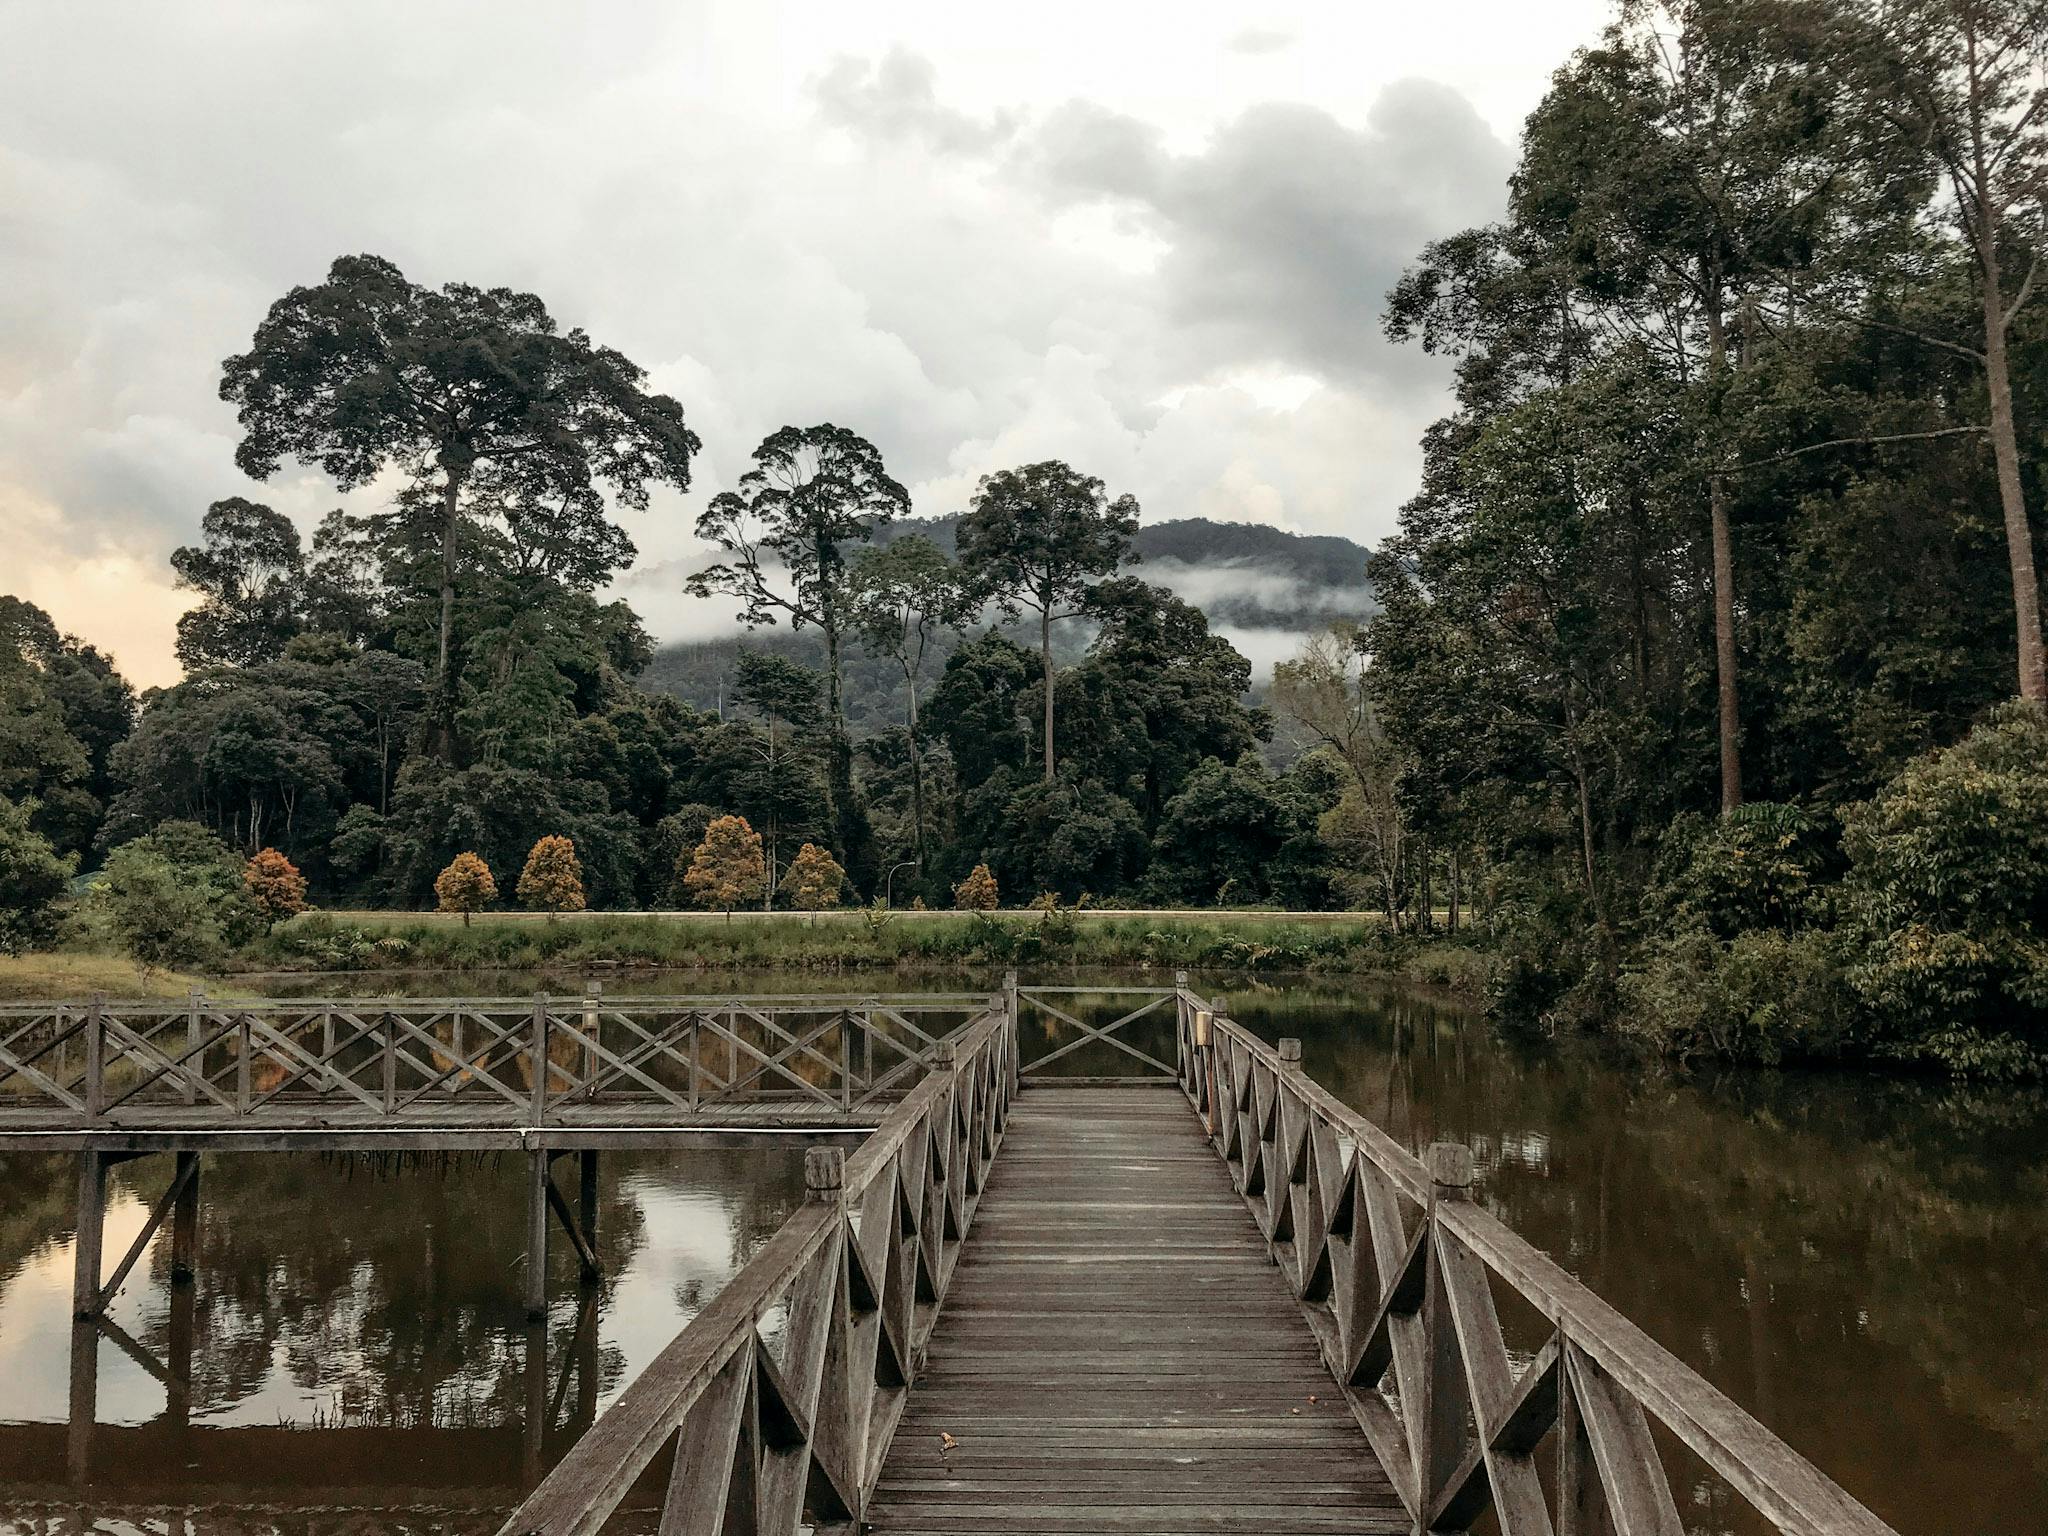 Maliau Basin Studies Area, the outer rim of the conservation zone, is pretty built up and has boardwalks to explore 